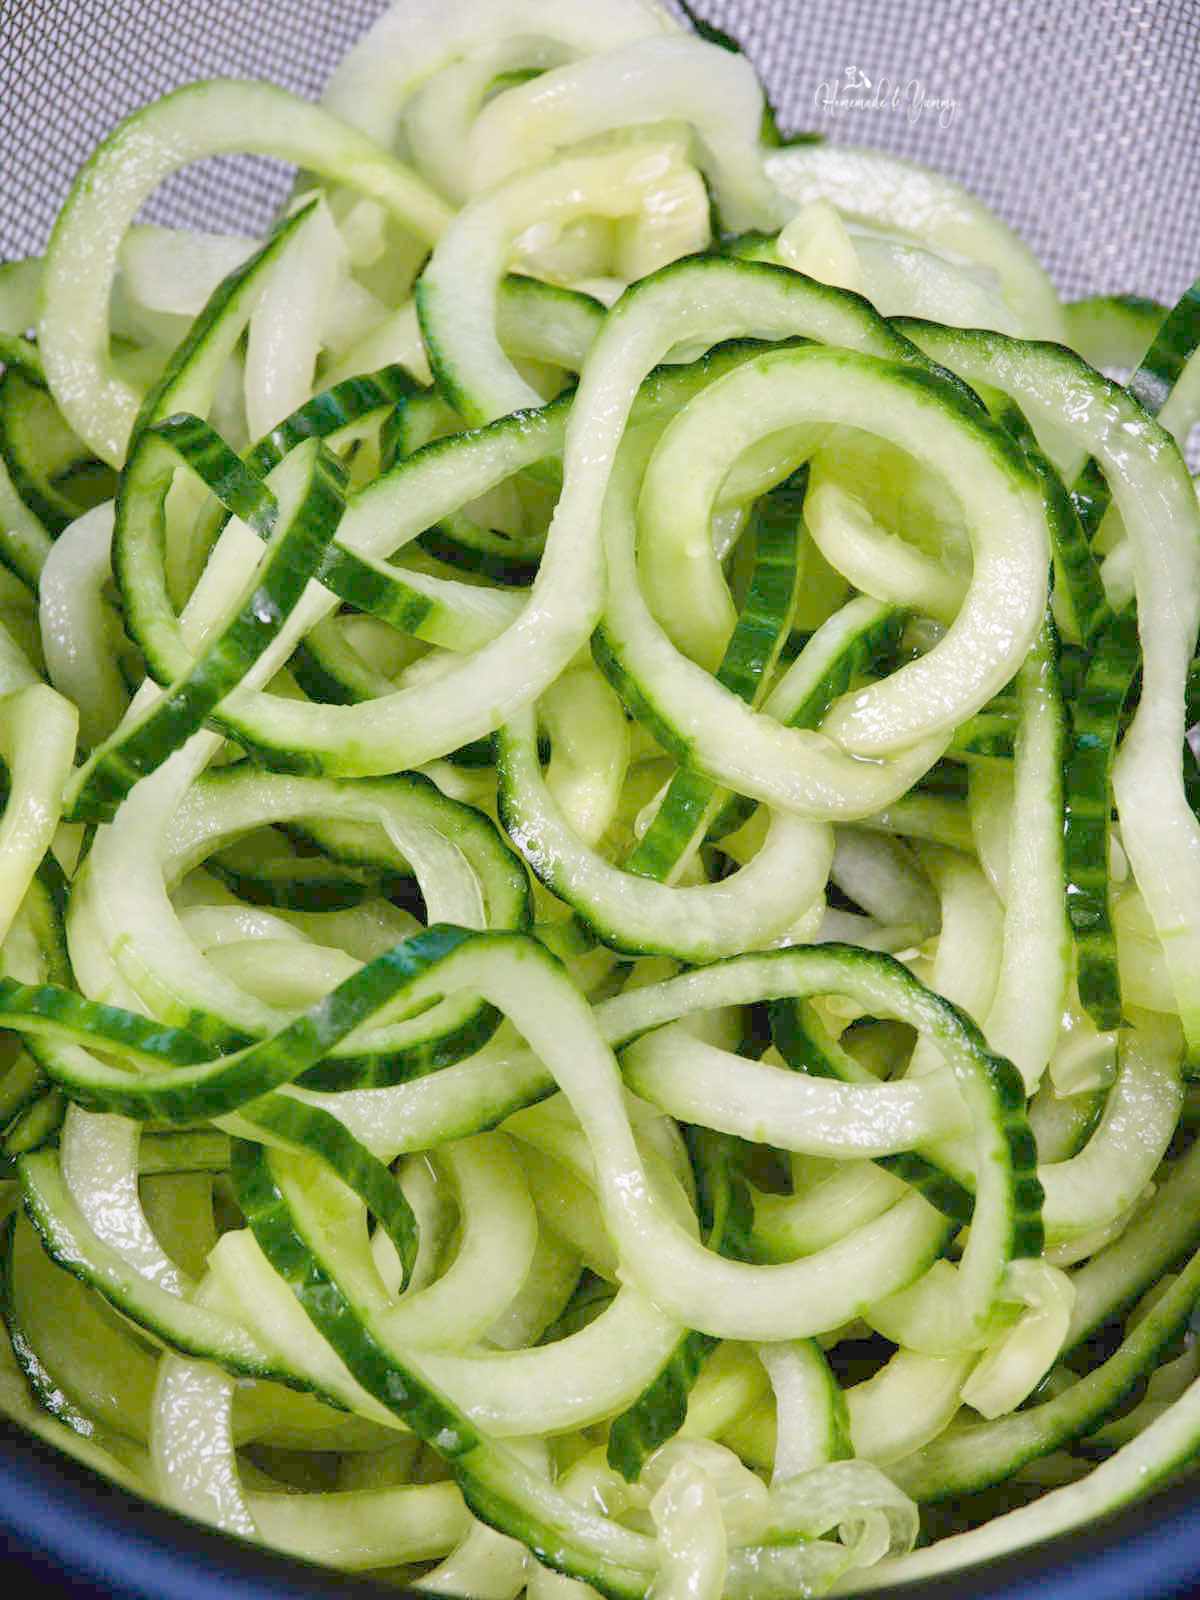 Cucumber noodles ready for the adding with the smoked salmon.